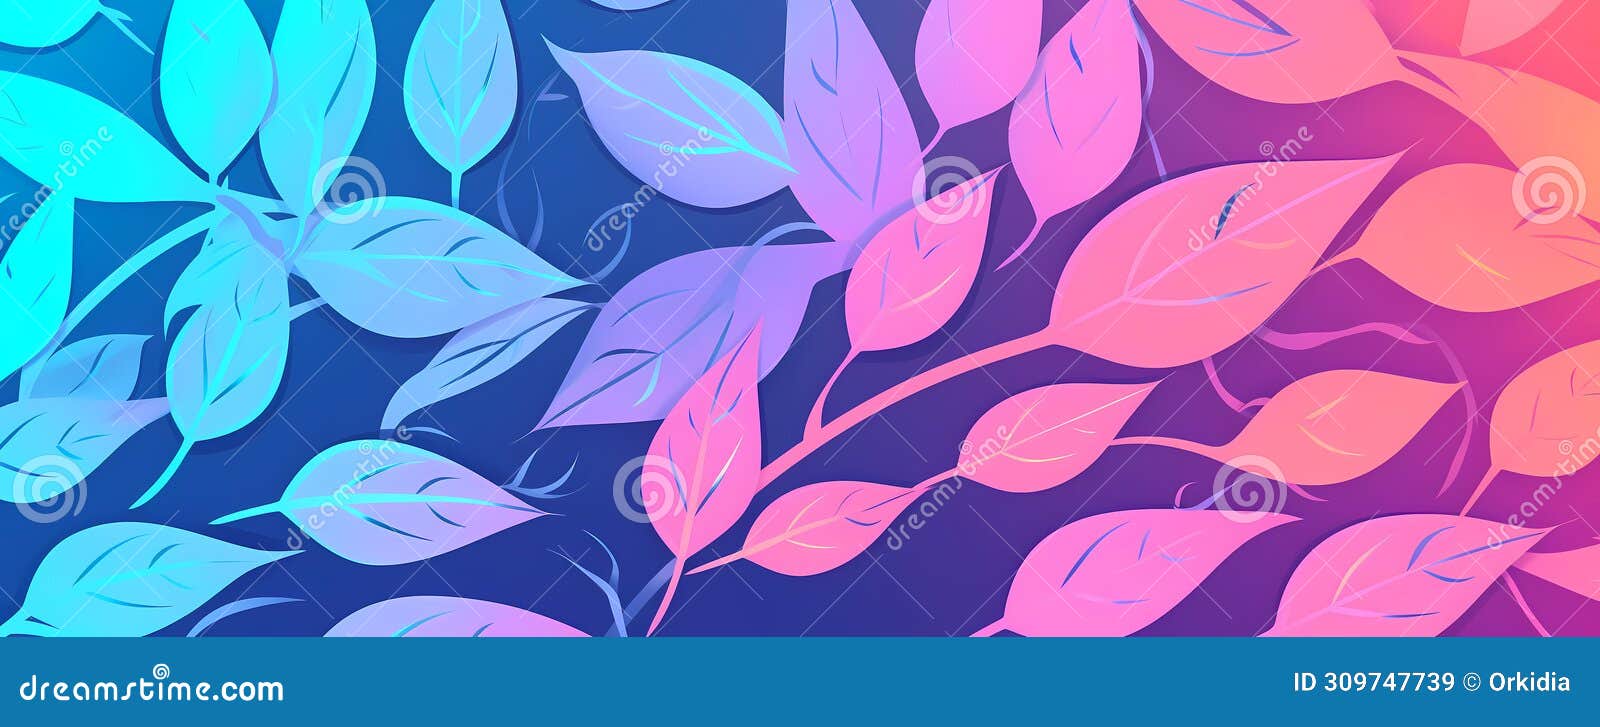 vegetal banner in pastel colors - nature  theme